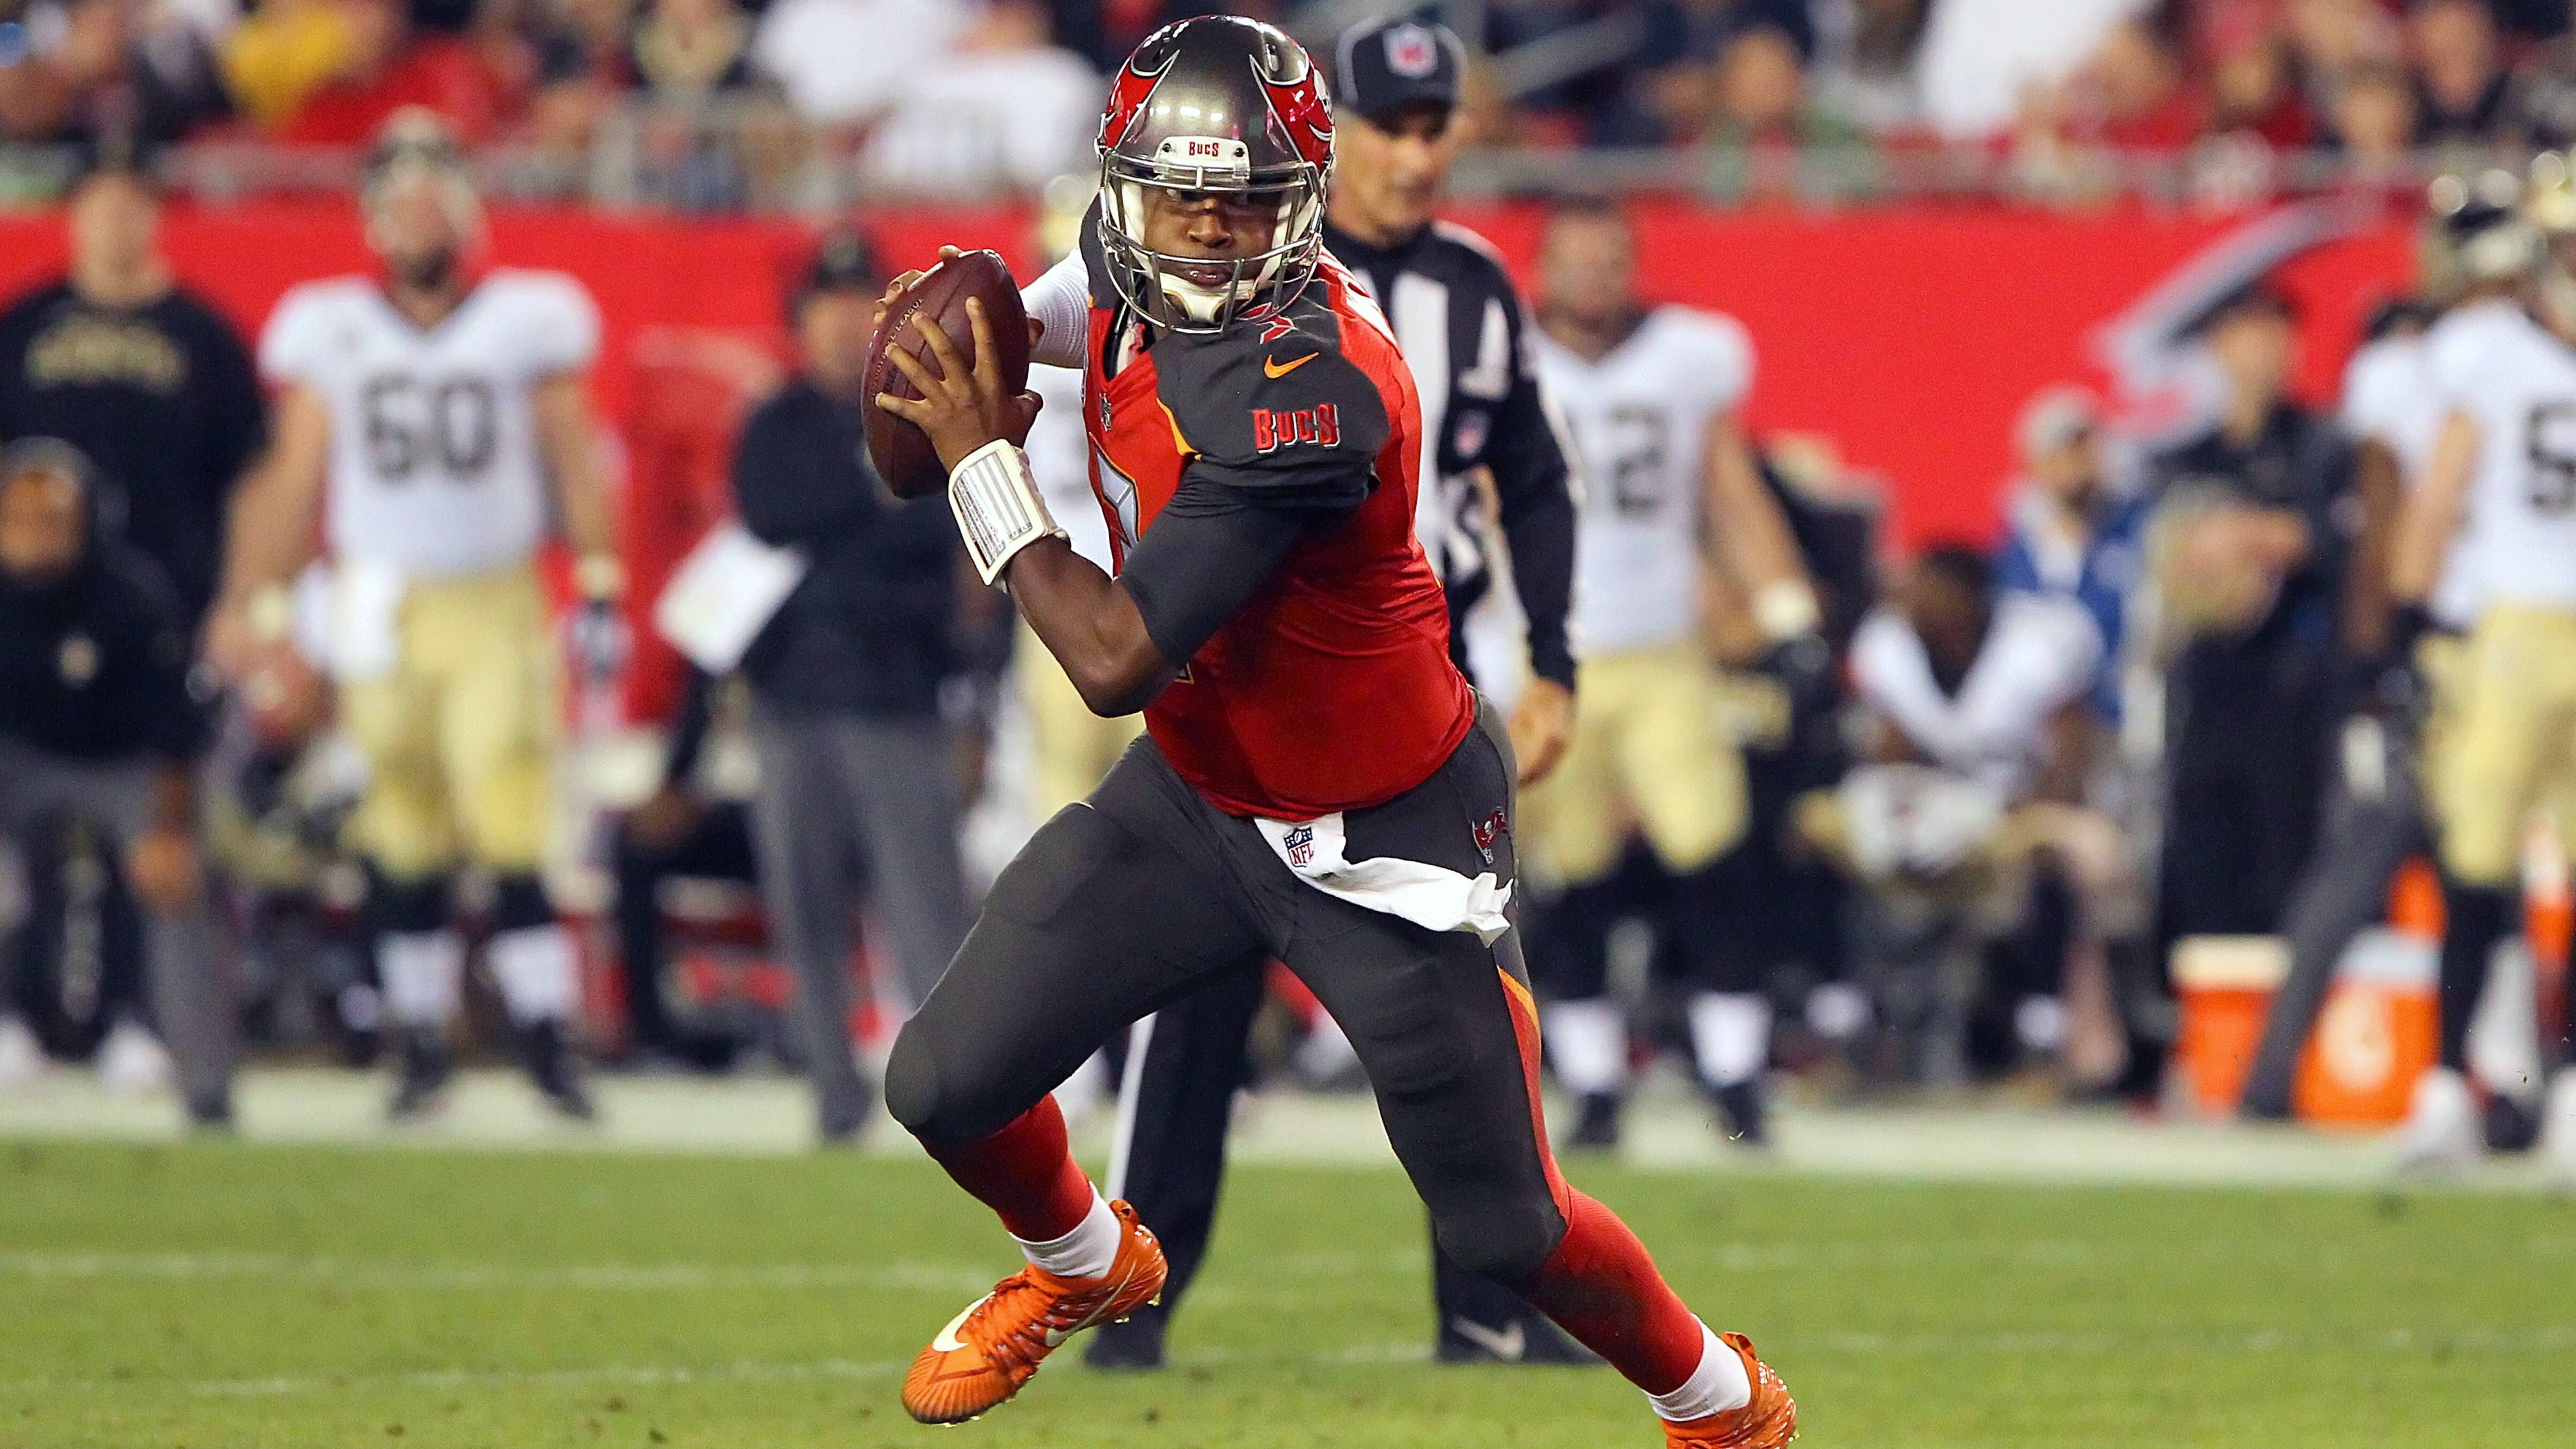 <strong>Draft 2015: 2 Quarterbacks<br></strong>1. Pick: Jameis Winston (Foto, Tampa Bay Buccaneers)<br>2. Pick: Marcus Mariota (Tennessee Titans)